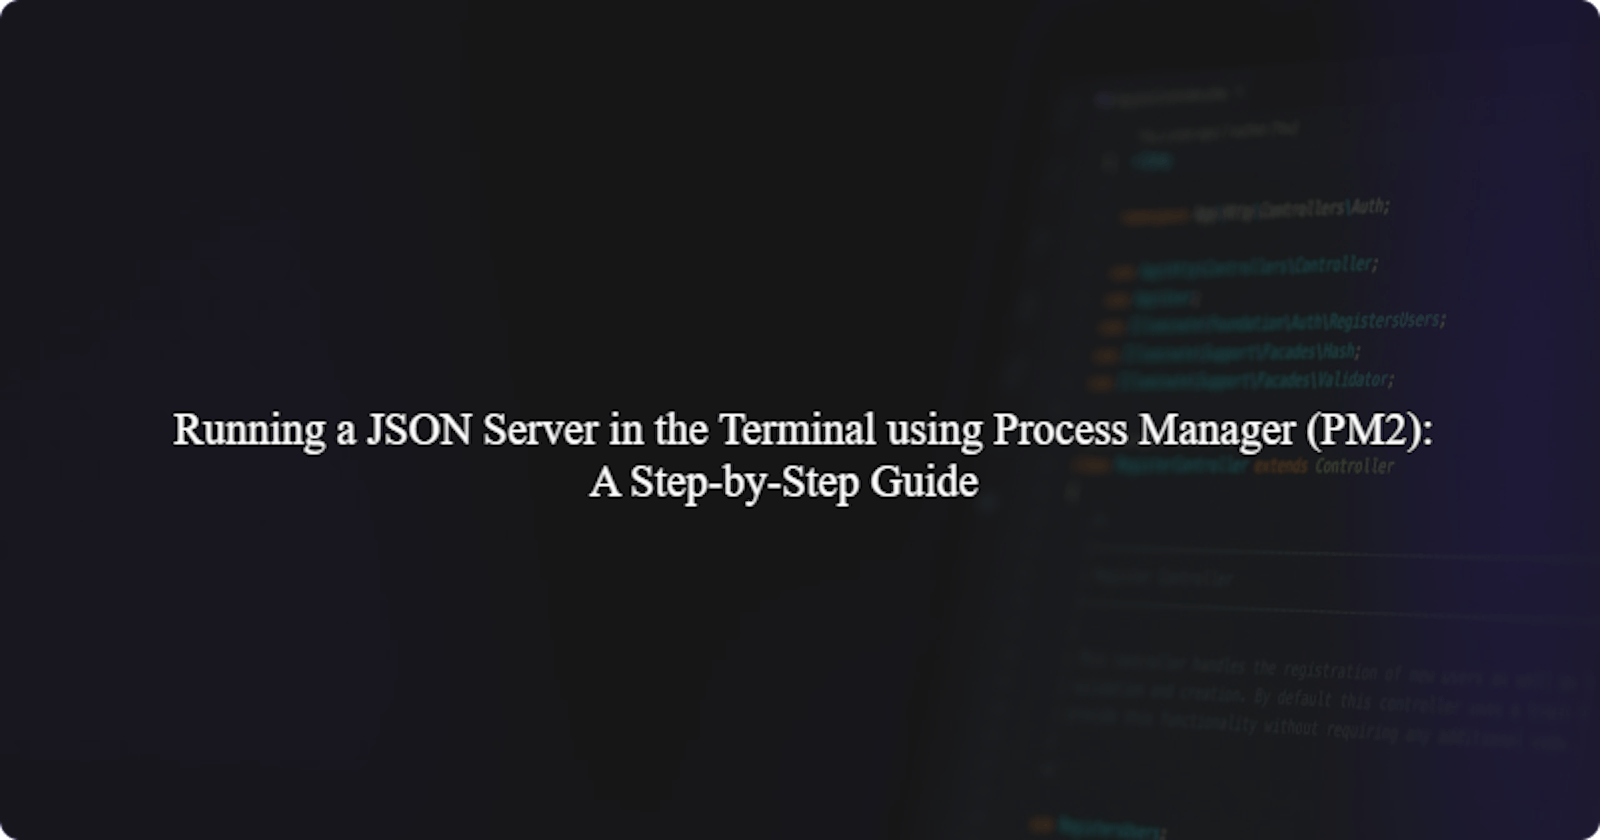 Running a JSON Server in the Terminal using Process Manager (PM2): A Step-by-Step Guide